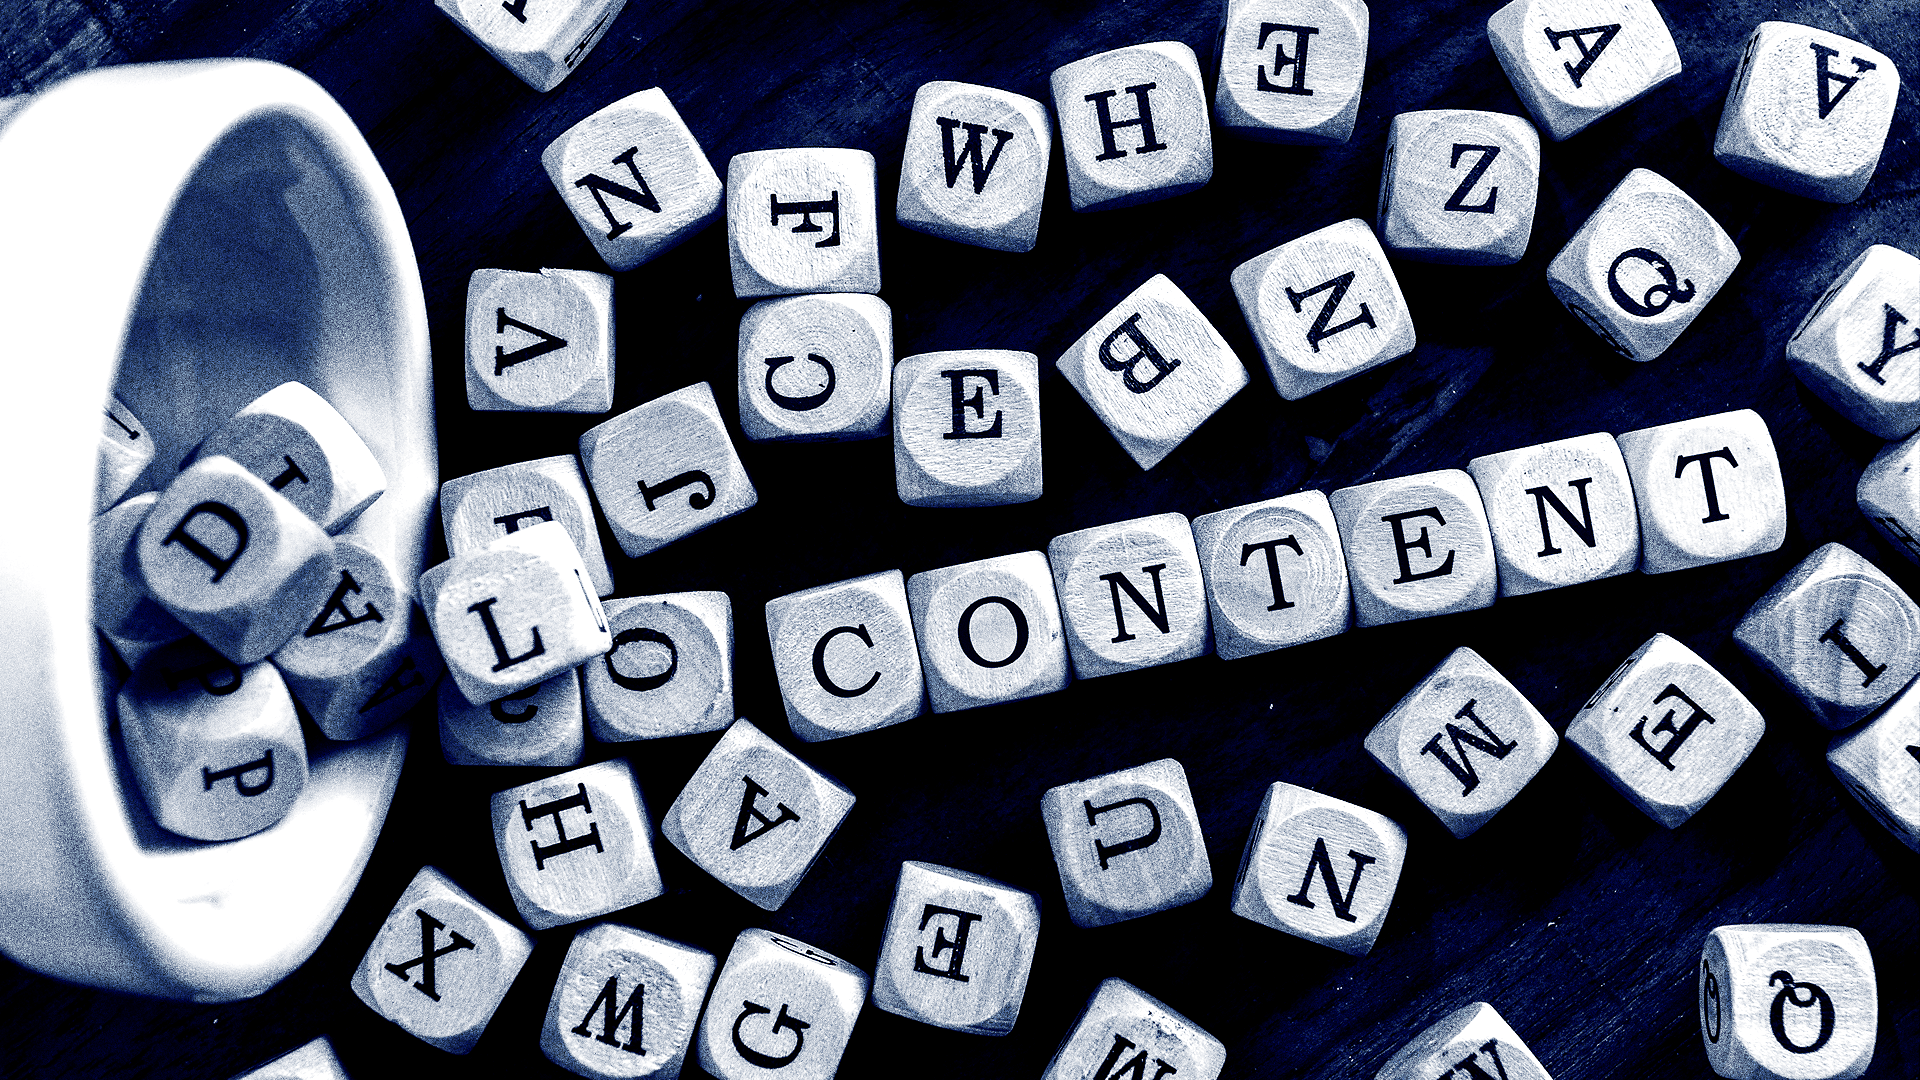 Digital Marketing with Content: Quality over Quantity